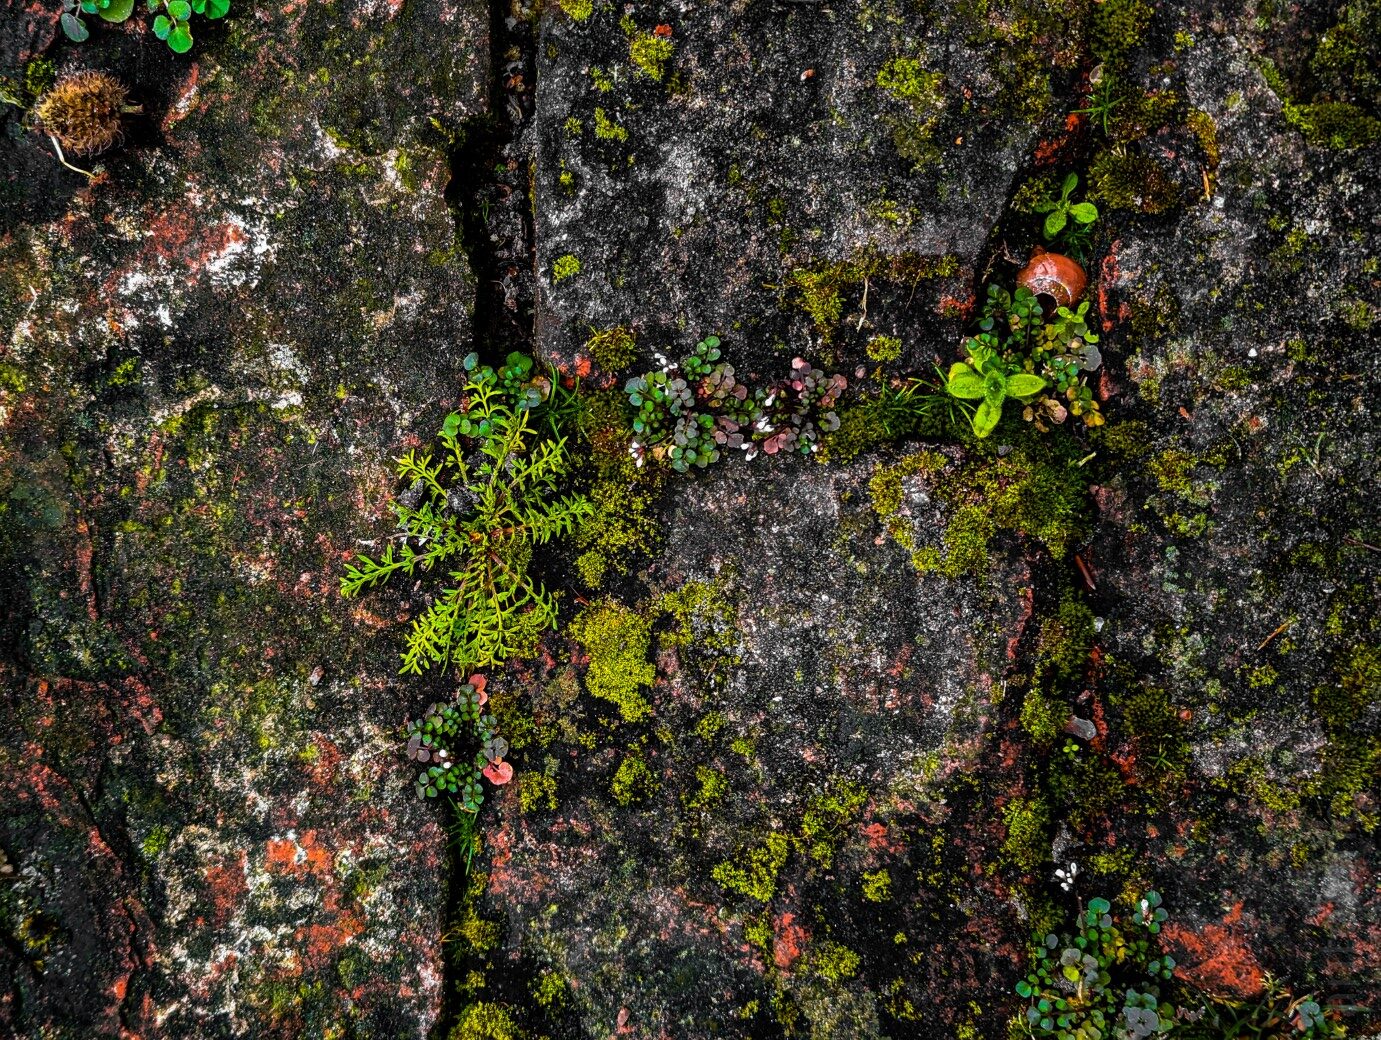 The little things that grow between your feet. The picture shows different types of lichen growing on the cobbles in the ornamental garden at Gooilust Estate.